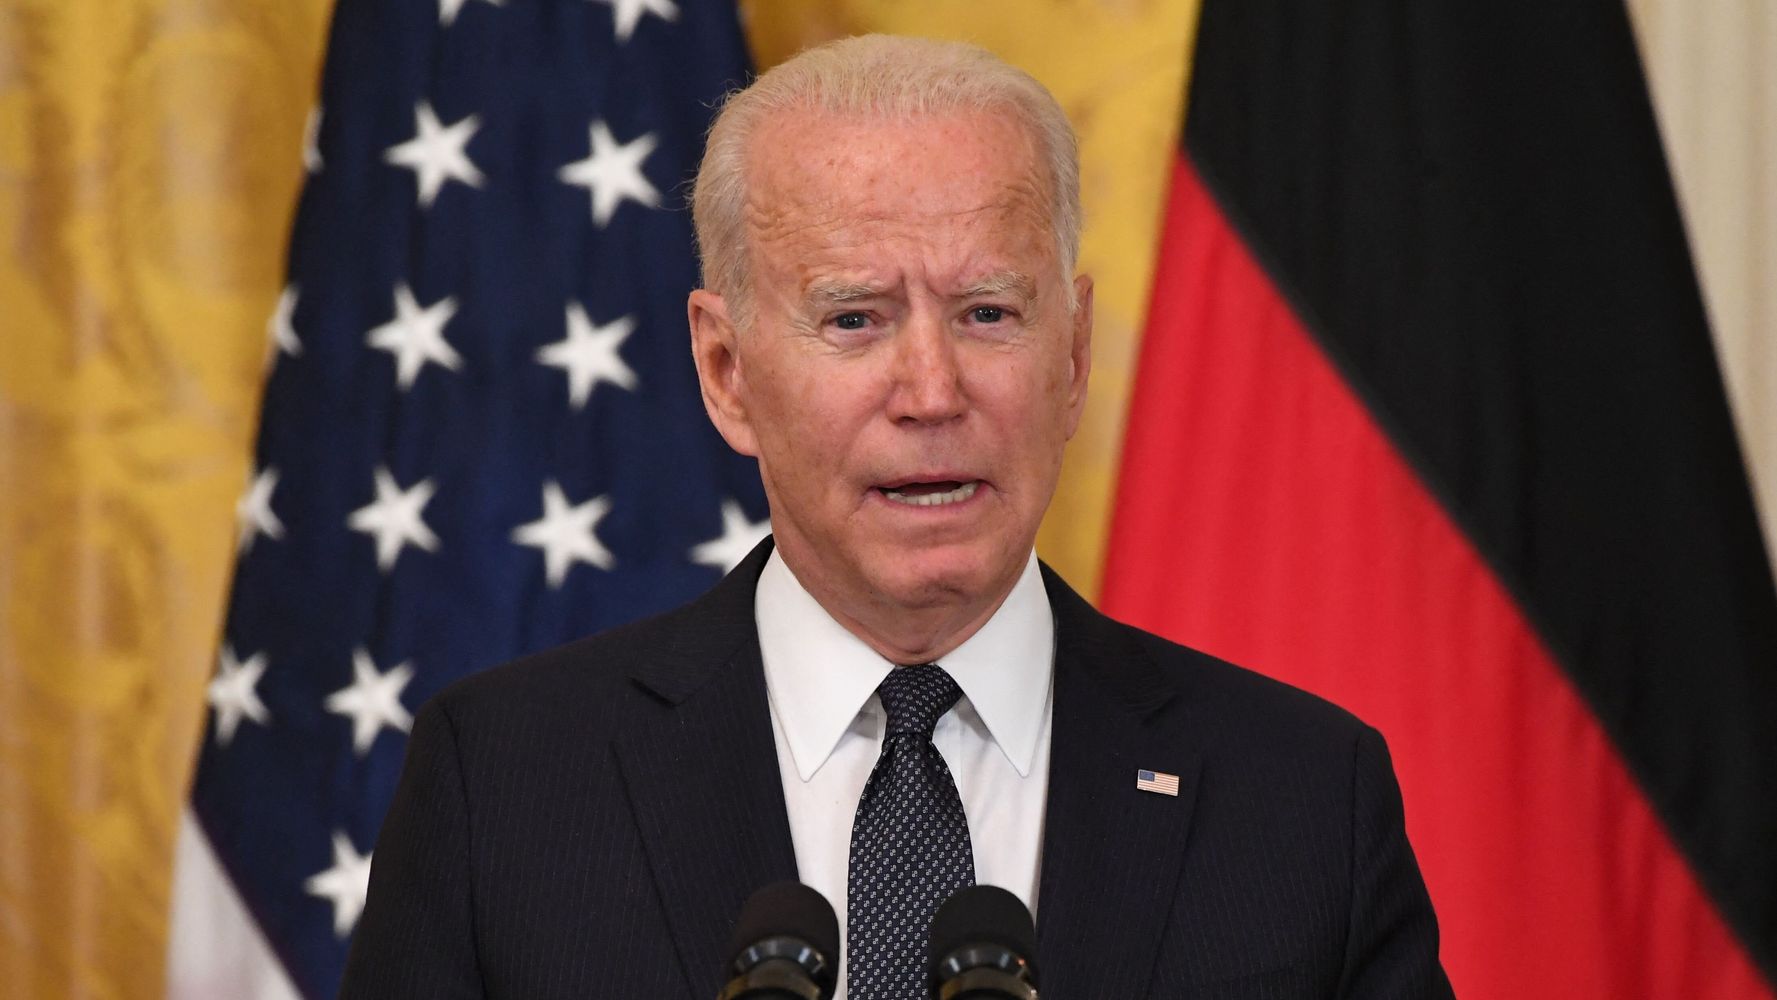 U.S. Won't Send Troops To Haiti To Stabilize Country, Biden Says